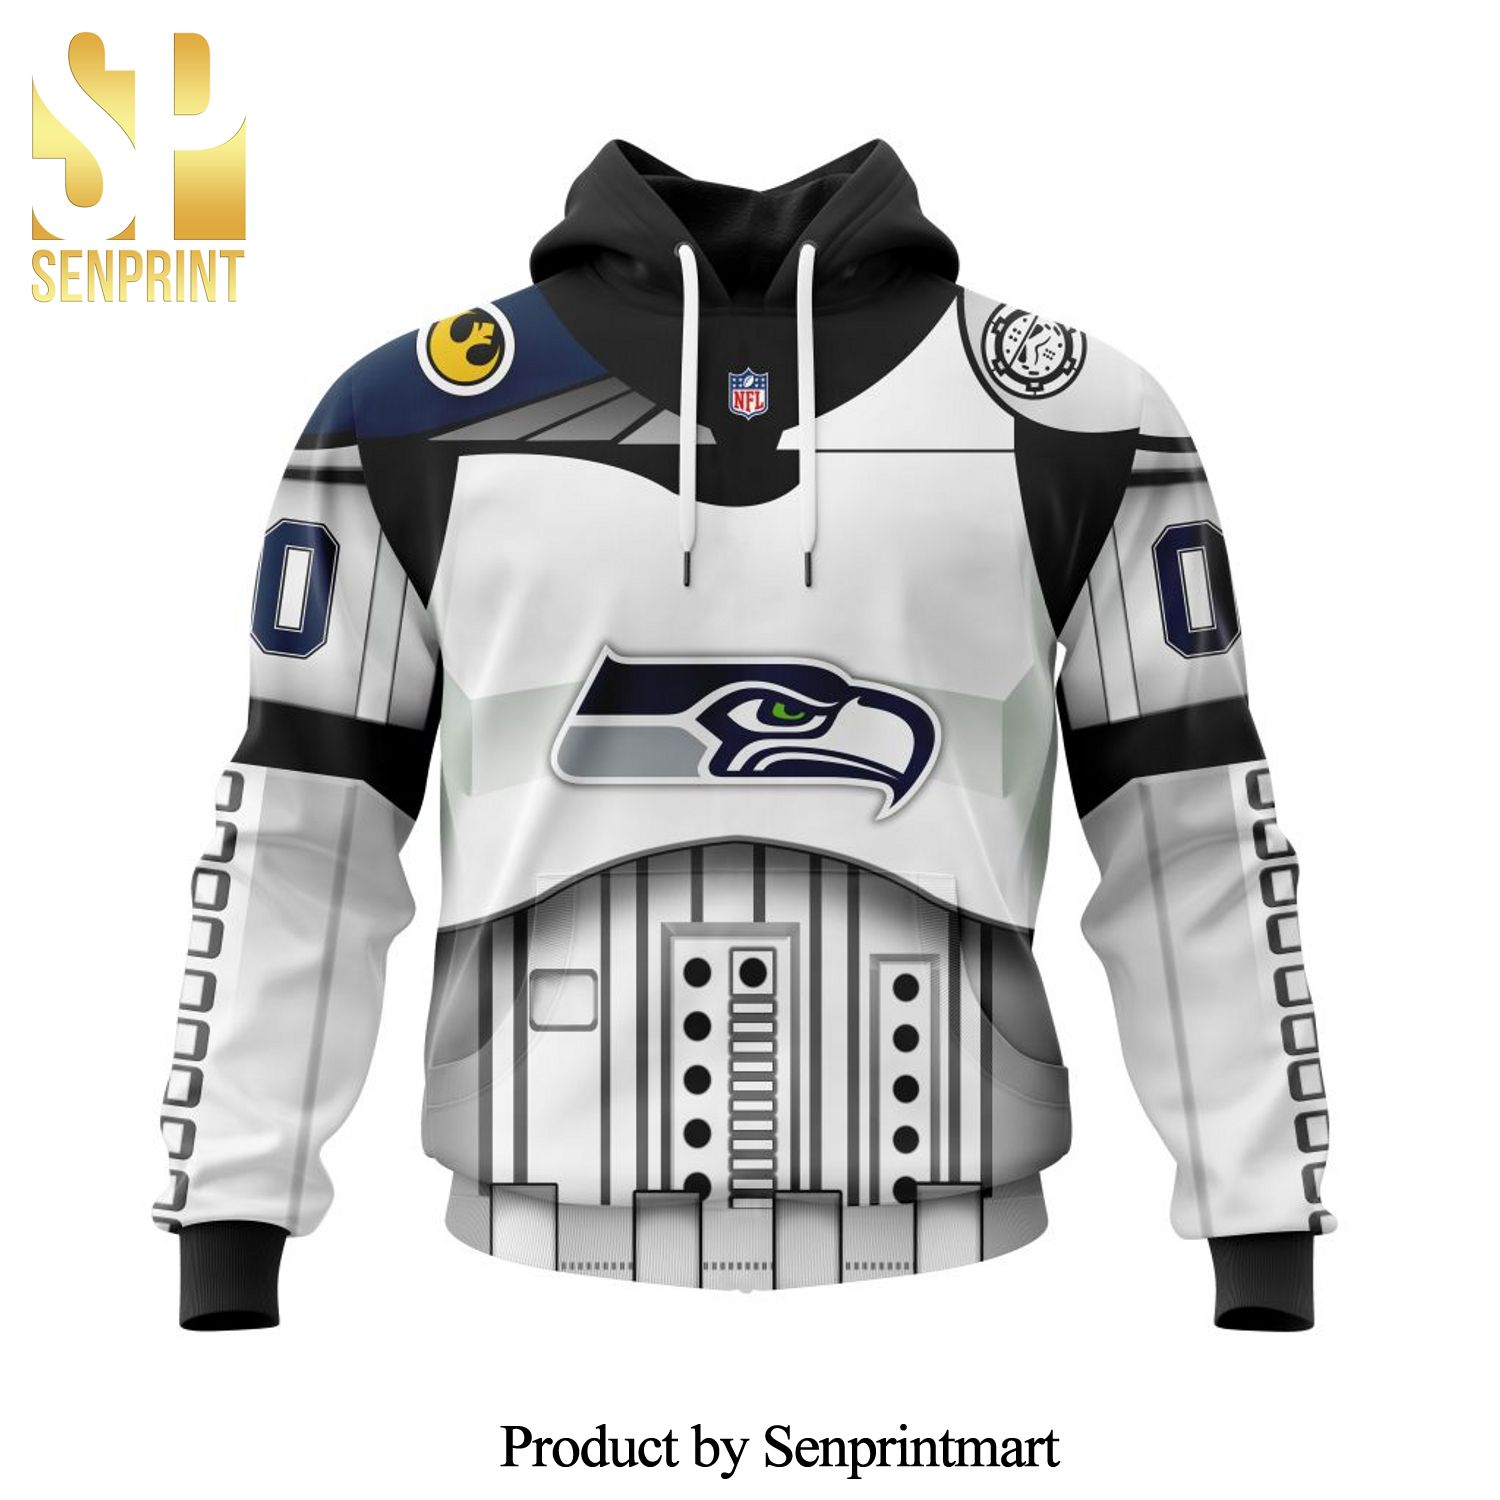 Seattle Seahawks Version Star Wars May The 4th Be With You All Over Printed Shirt